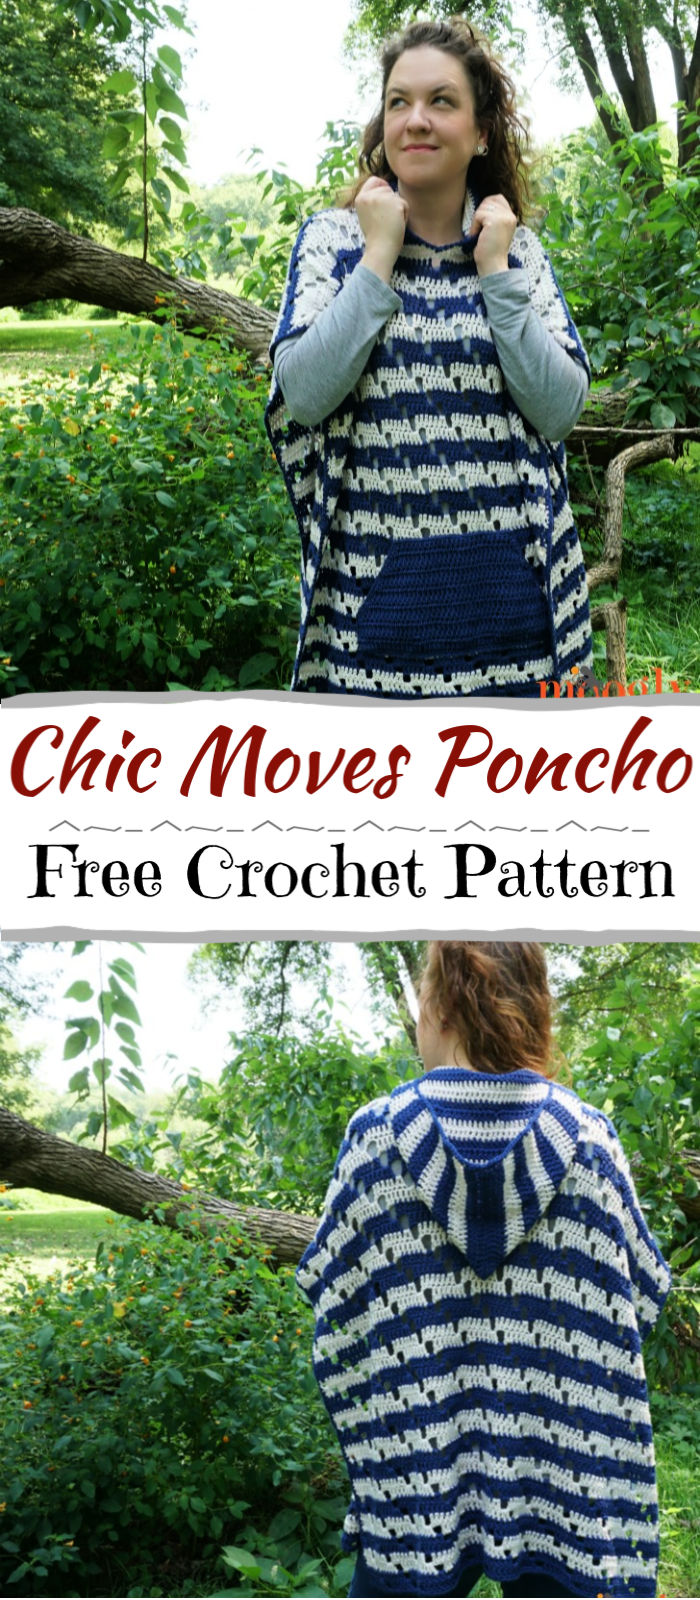 How to Crochet Chic Moves Poncho Free Pattern